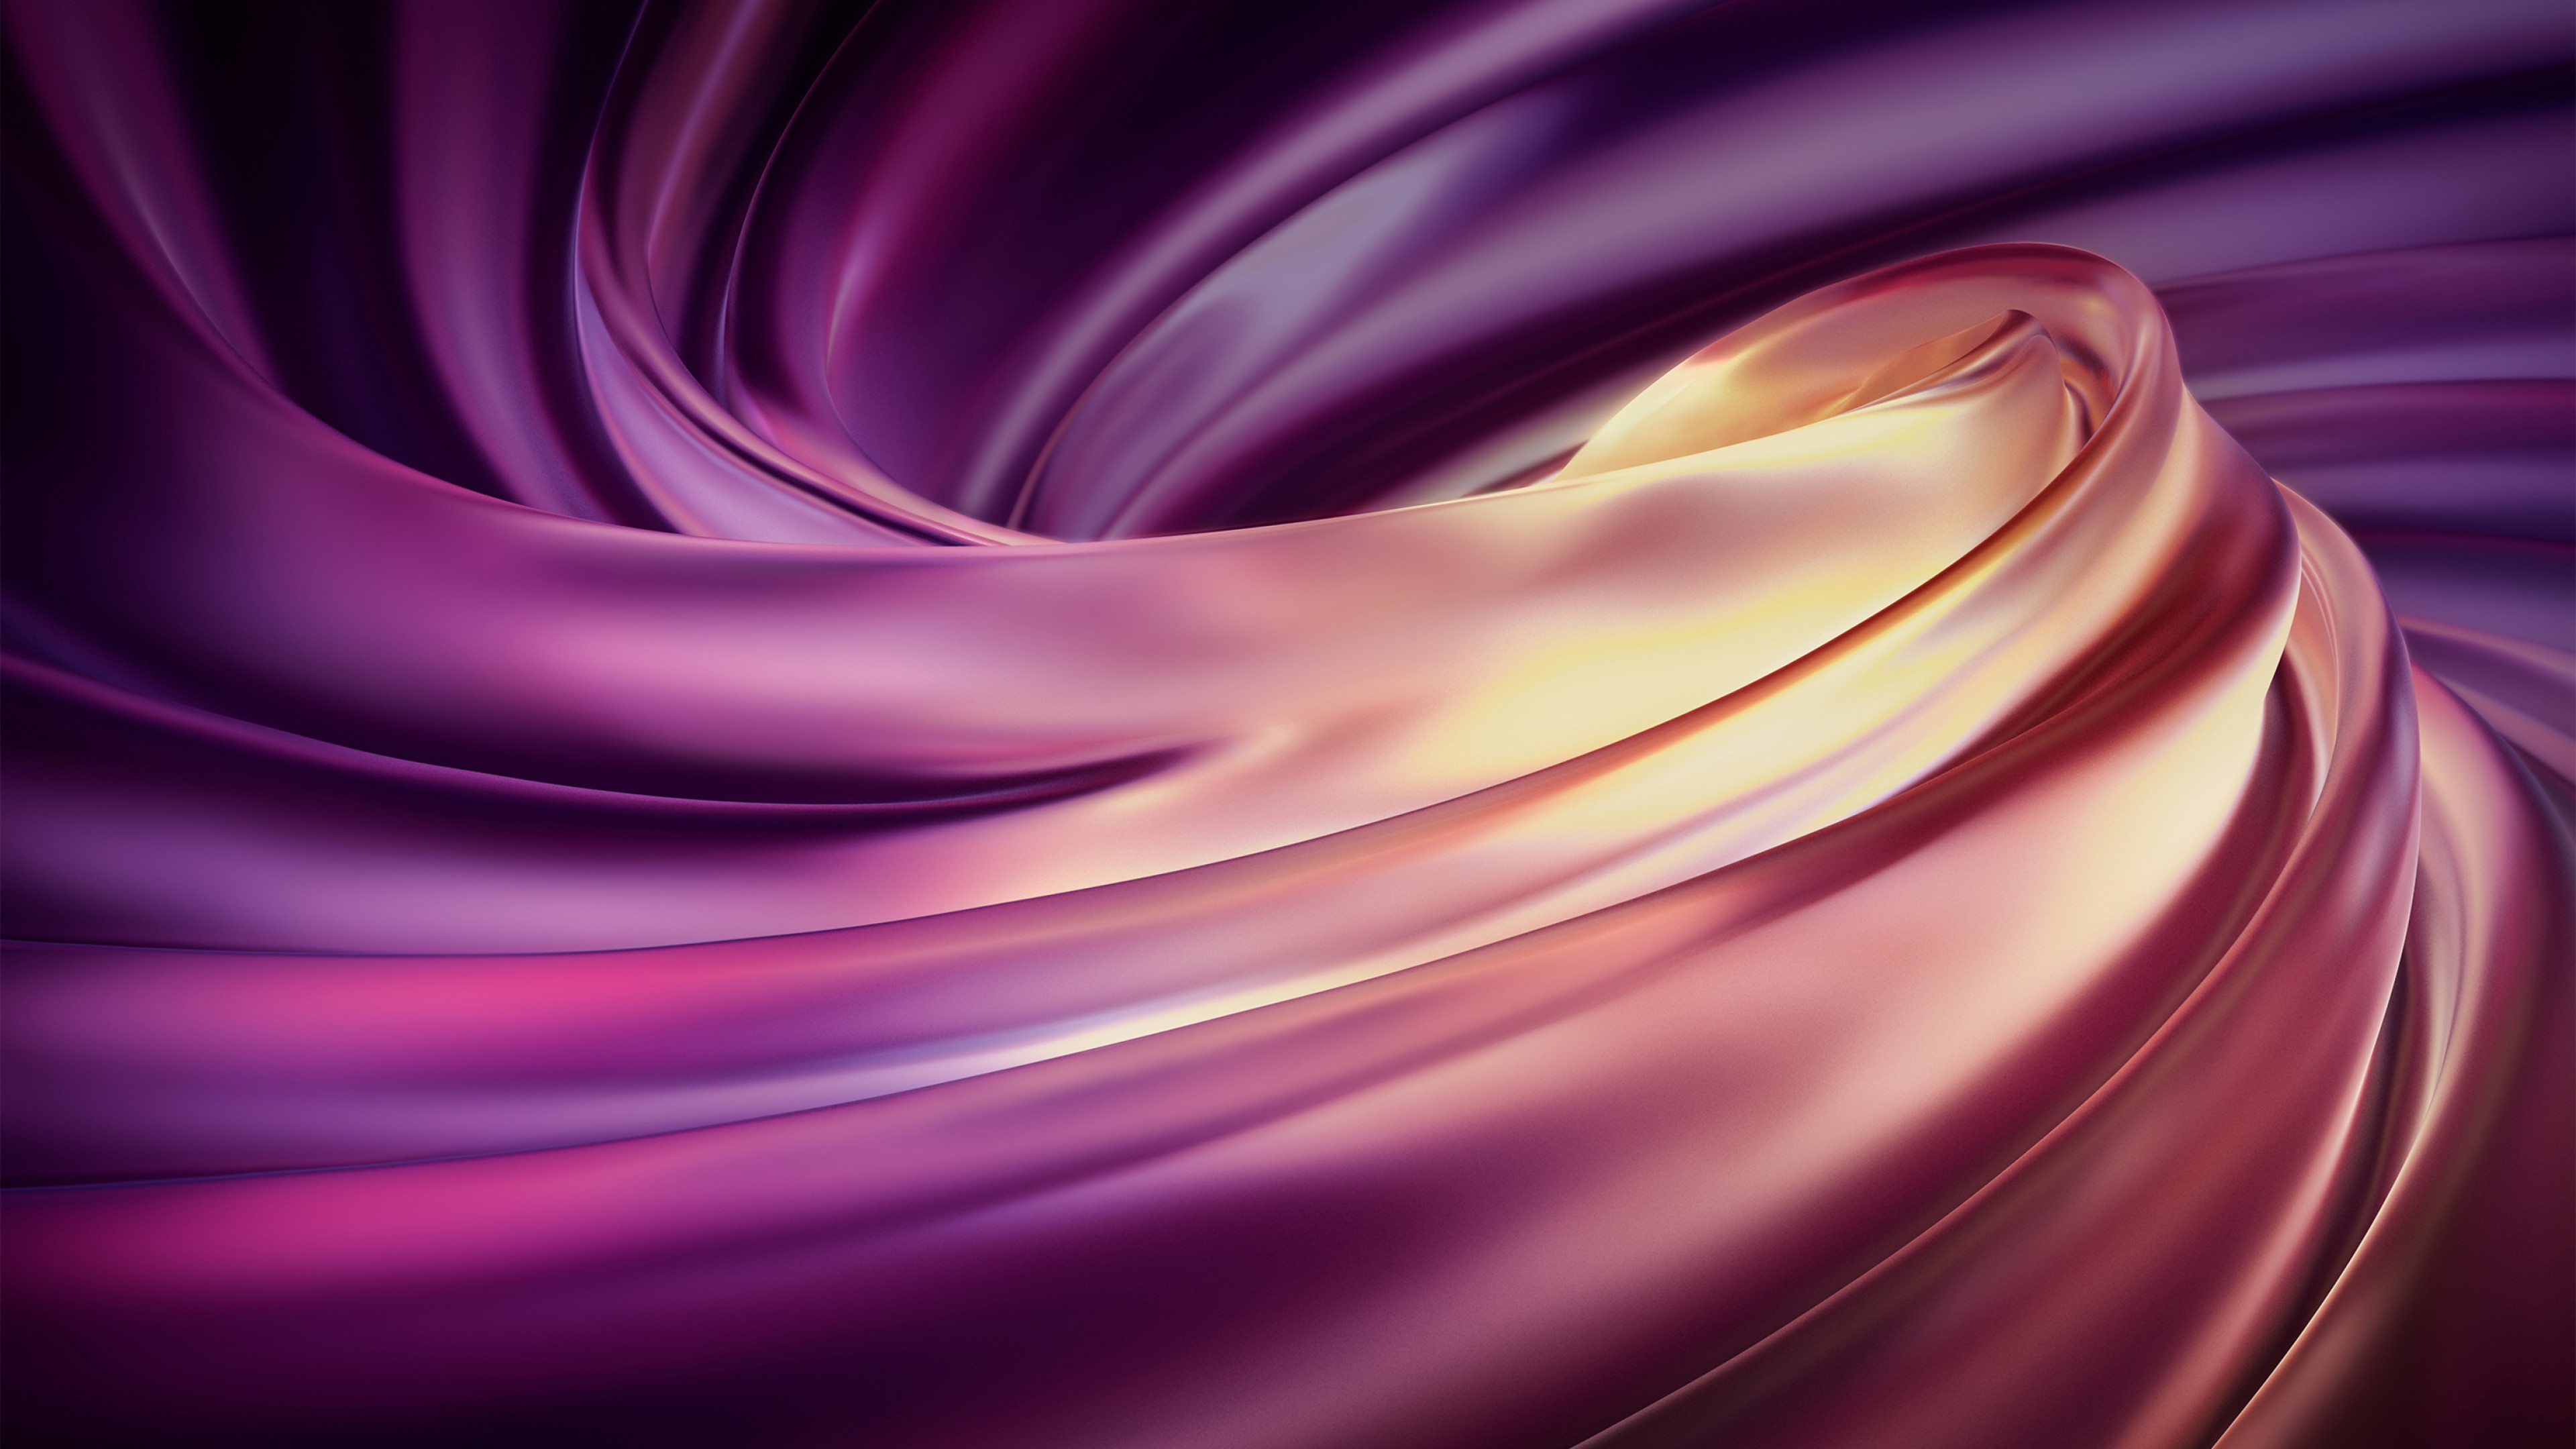 Wallpaper Huawei Matebook Pro 2019, abstract, colorful, 4K, OS #22320